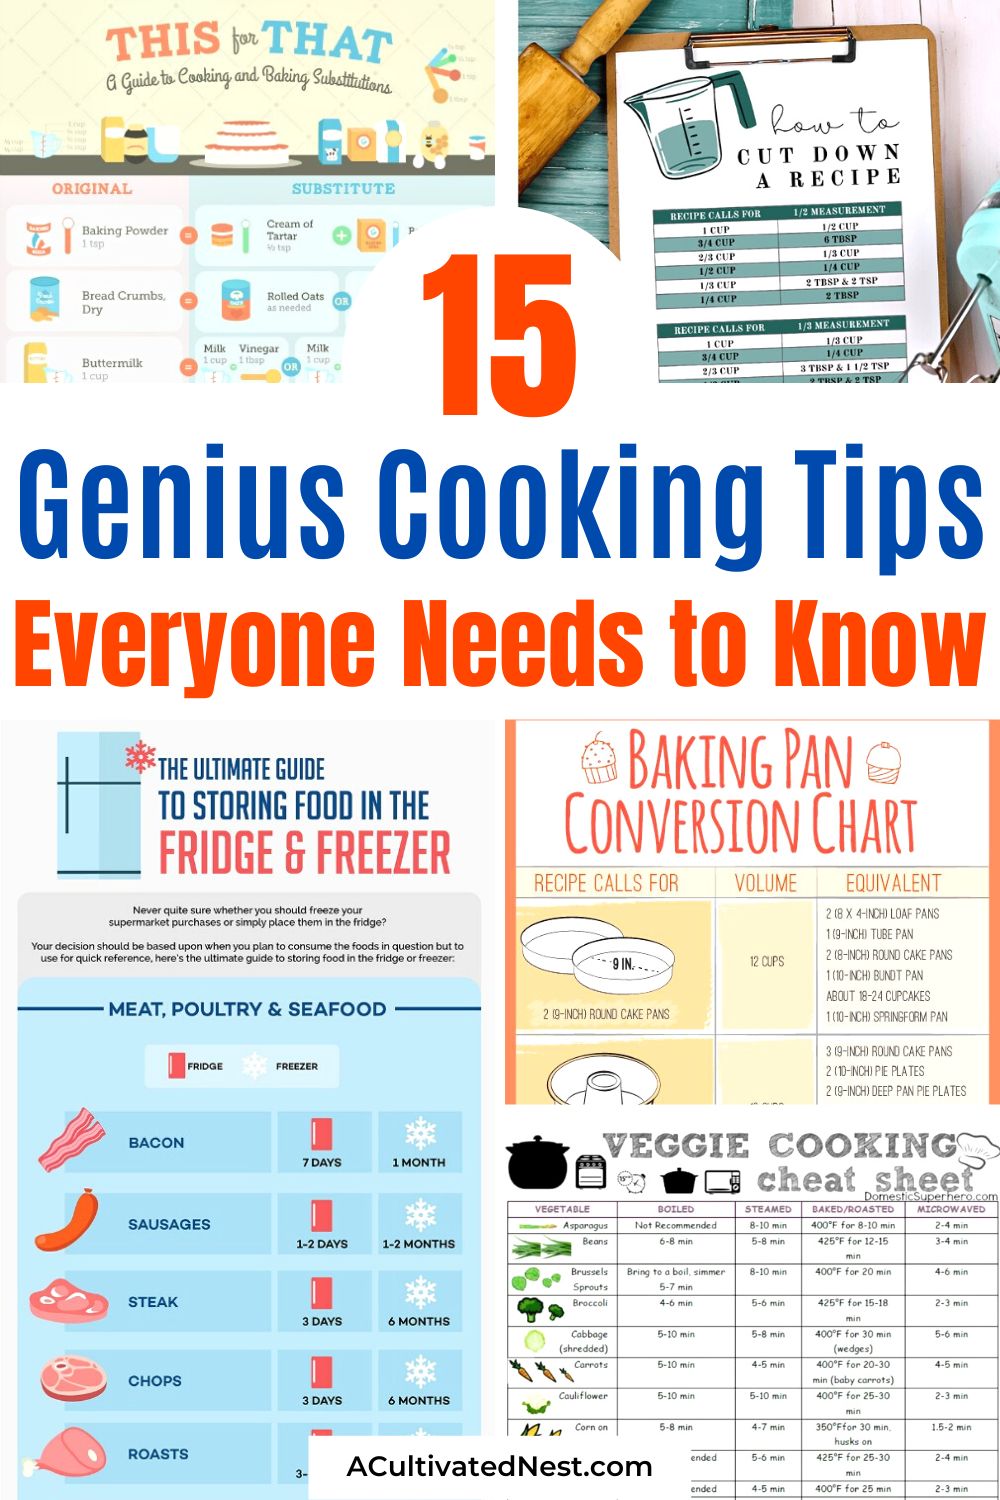 15 Super Handy Cooking Tips Everyone Needs to Know- Looking to level up your cooking game? Discover 15 must-know cooking tips that will transform your meals! Store food properly, convert baking pans effortlessly, and achieve perfectly cooked vegetables and meats. Check out these infographics to become a kitchen pro! | #CookingHacks #KitchenTips #MealPrepIdeas #cooking #ACultivatedNest